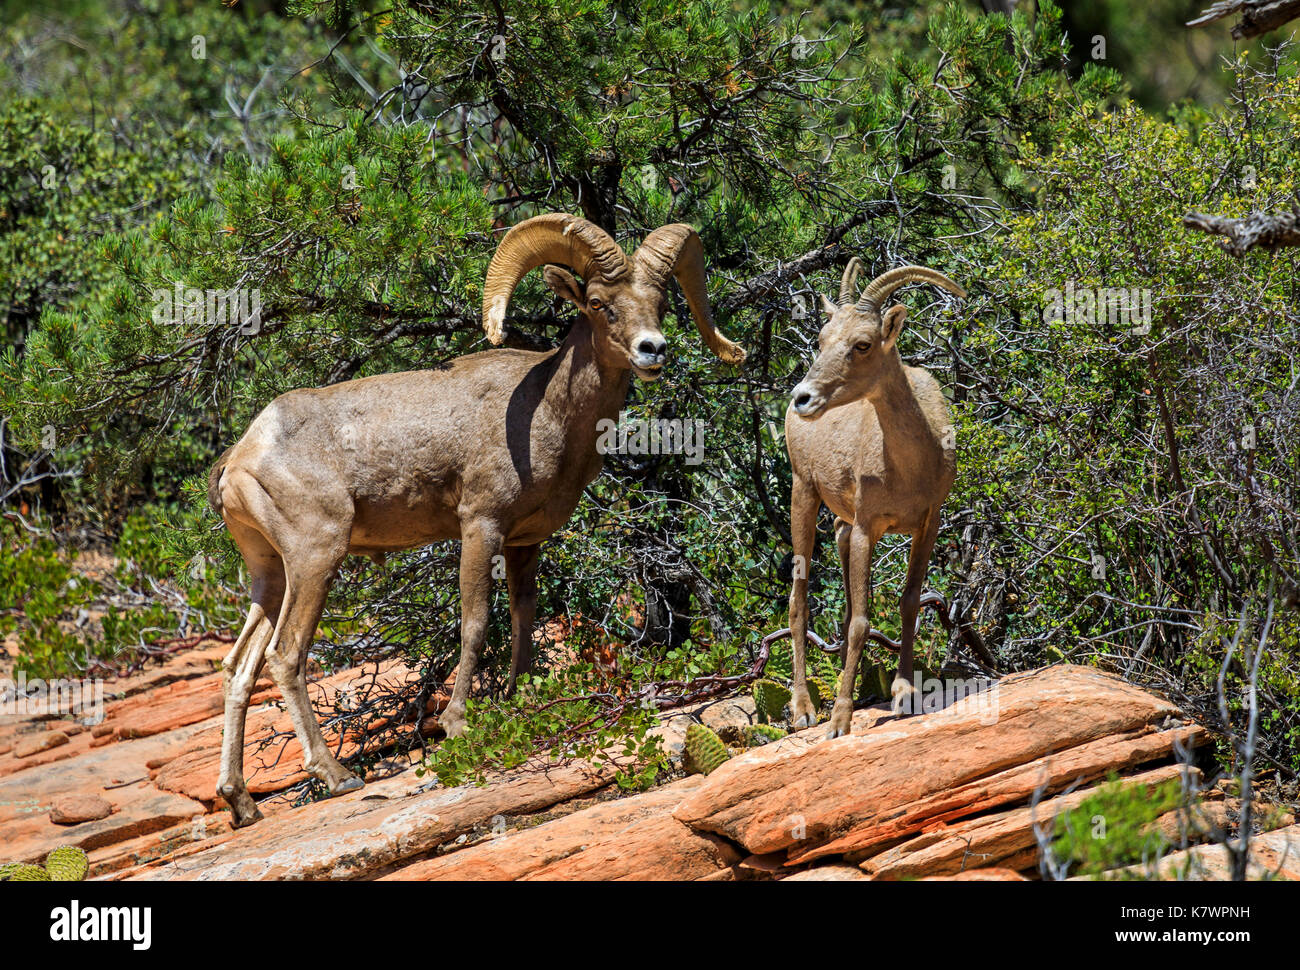 In this shot we see two Desert Big Horn Sheep, a ram and a ewe, standing on the red rock in Zion National Park, Utah, USA. Stock Photo